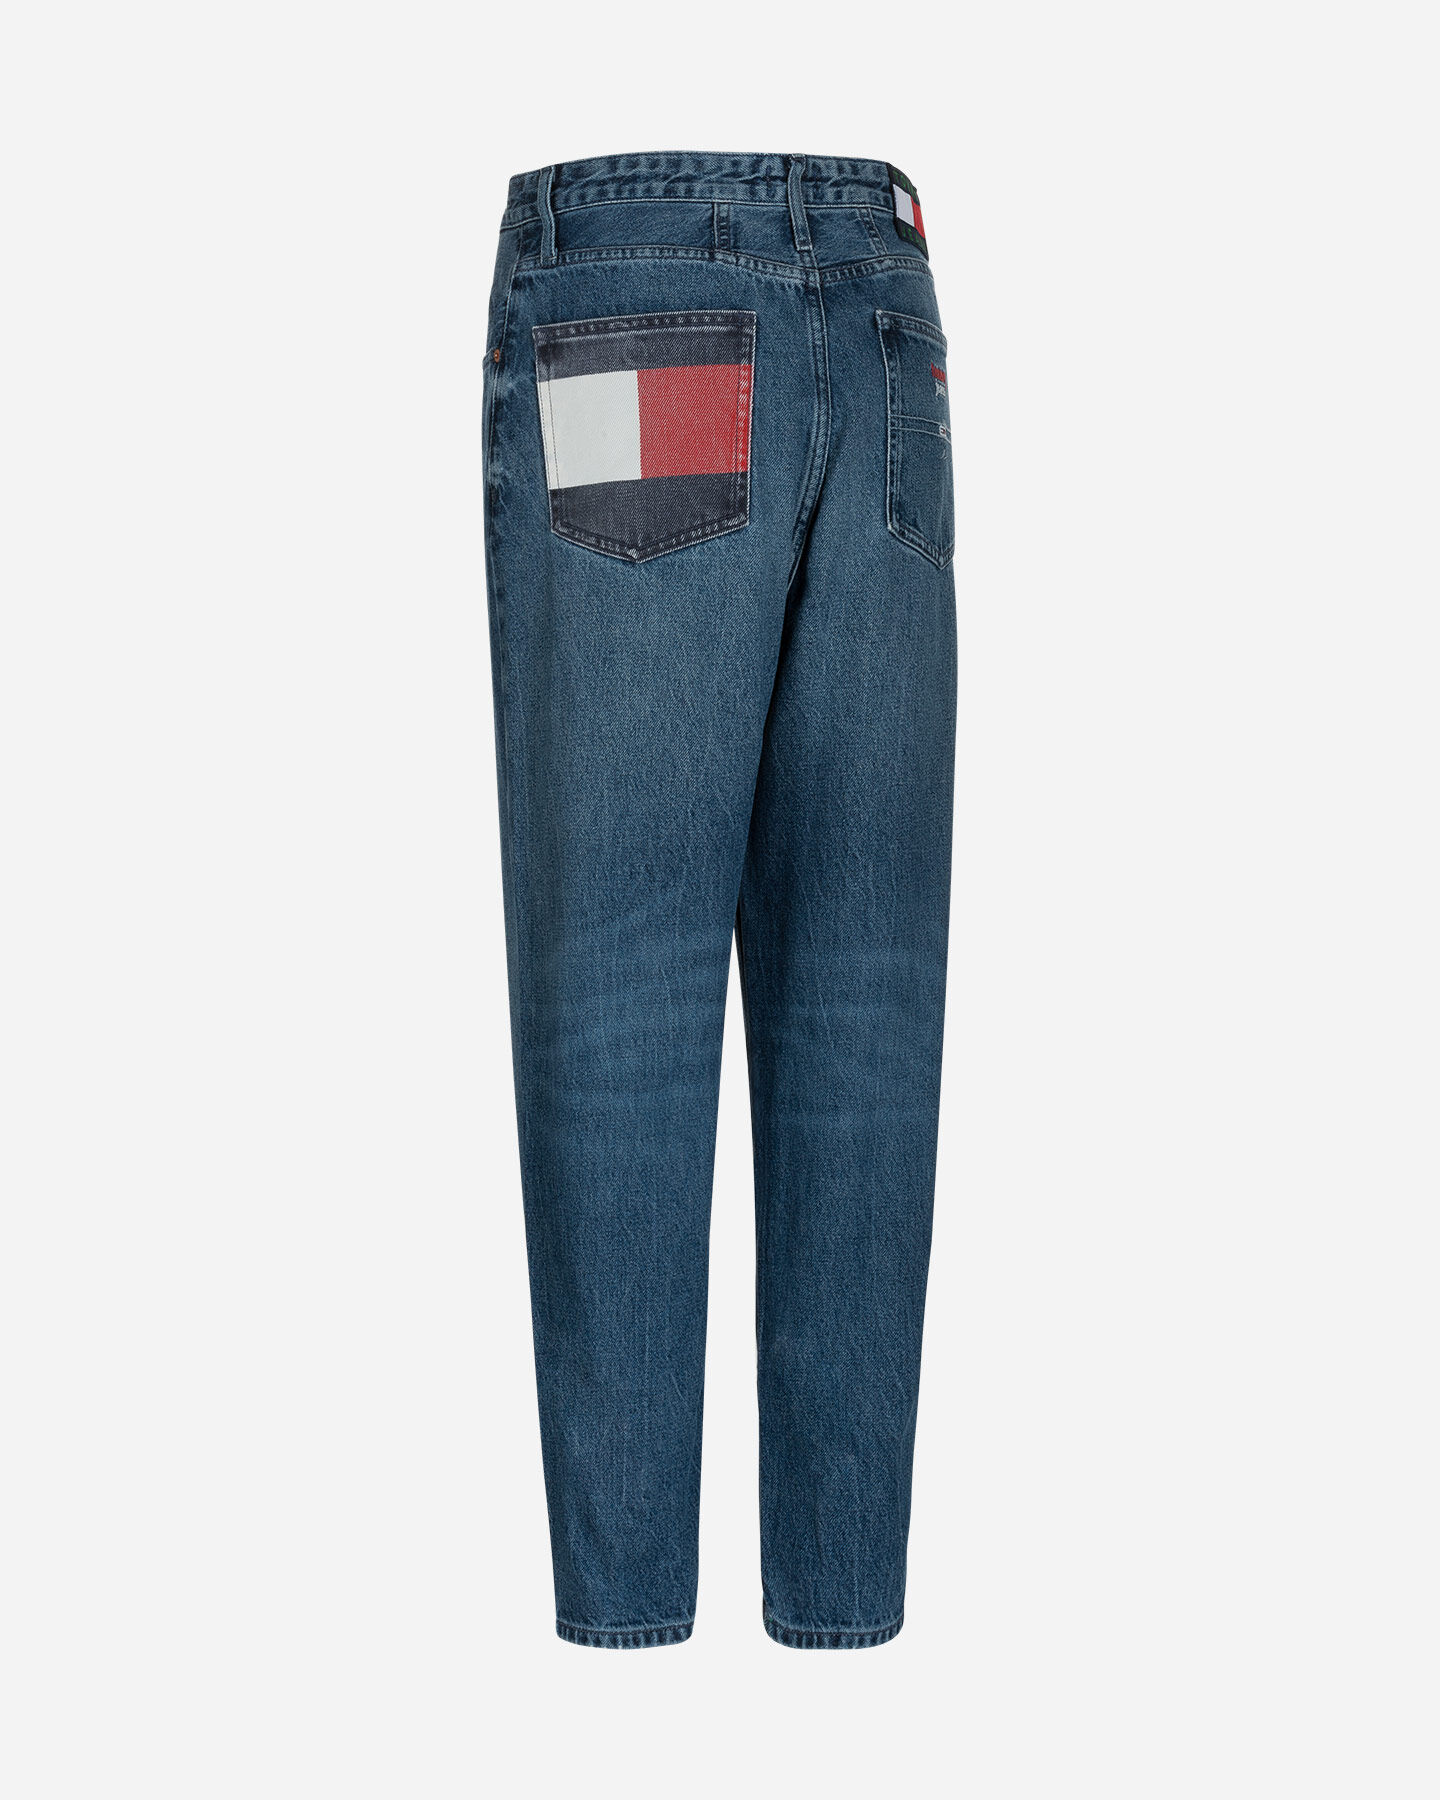  Jeans TOMMY HILFIGER MOM FIT MID W S4082493|1A5|26 scatto 1